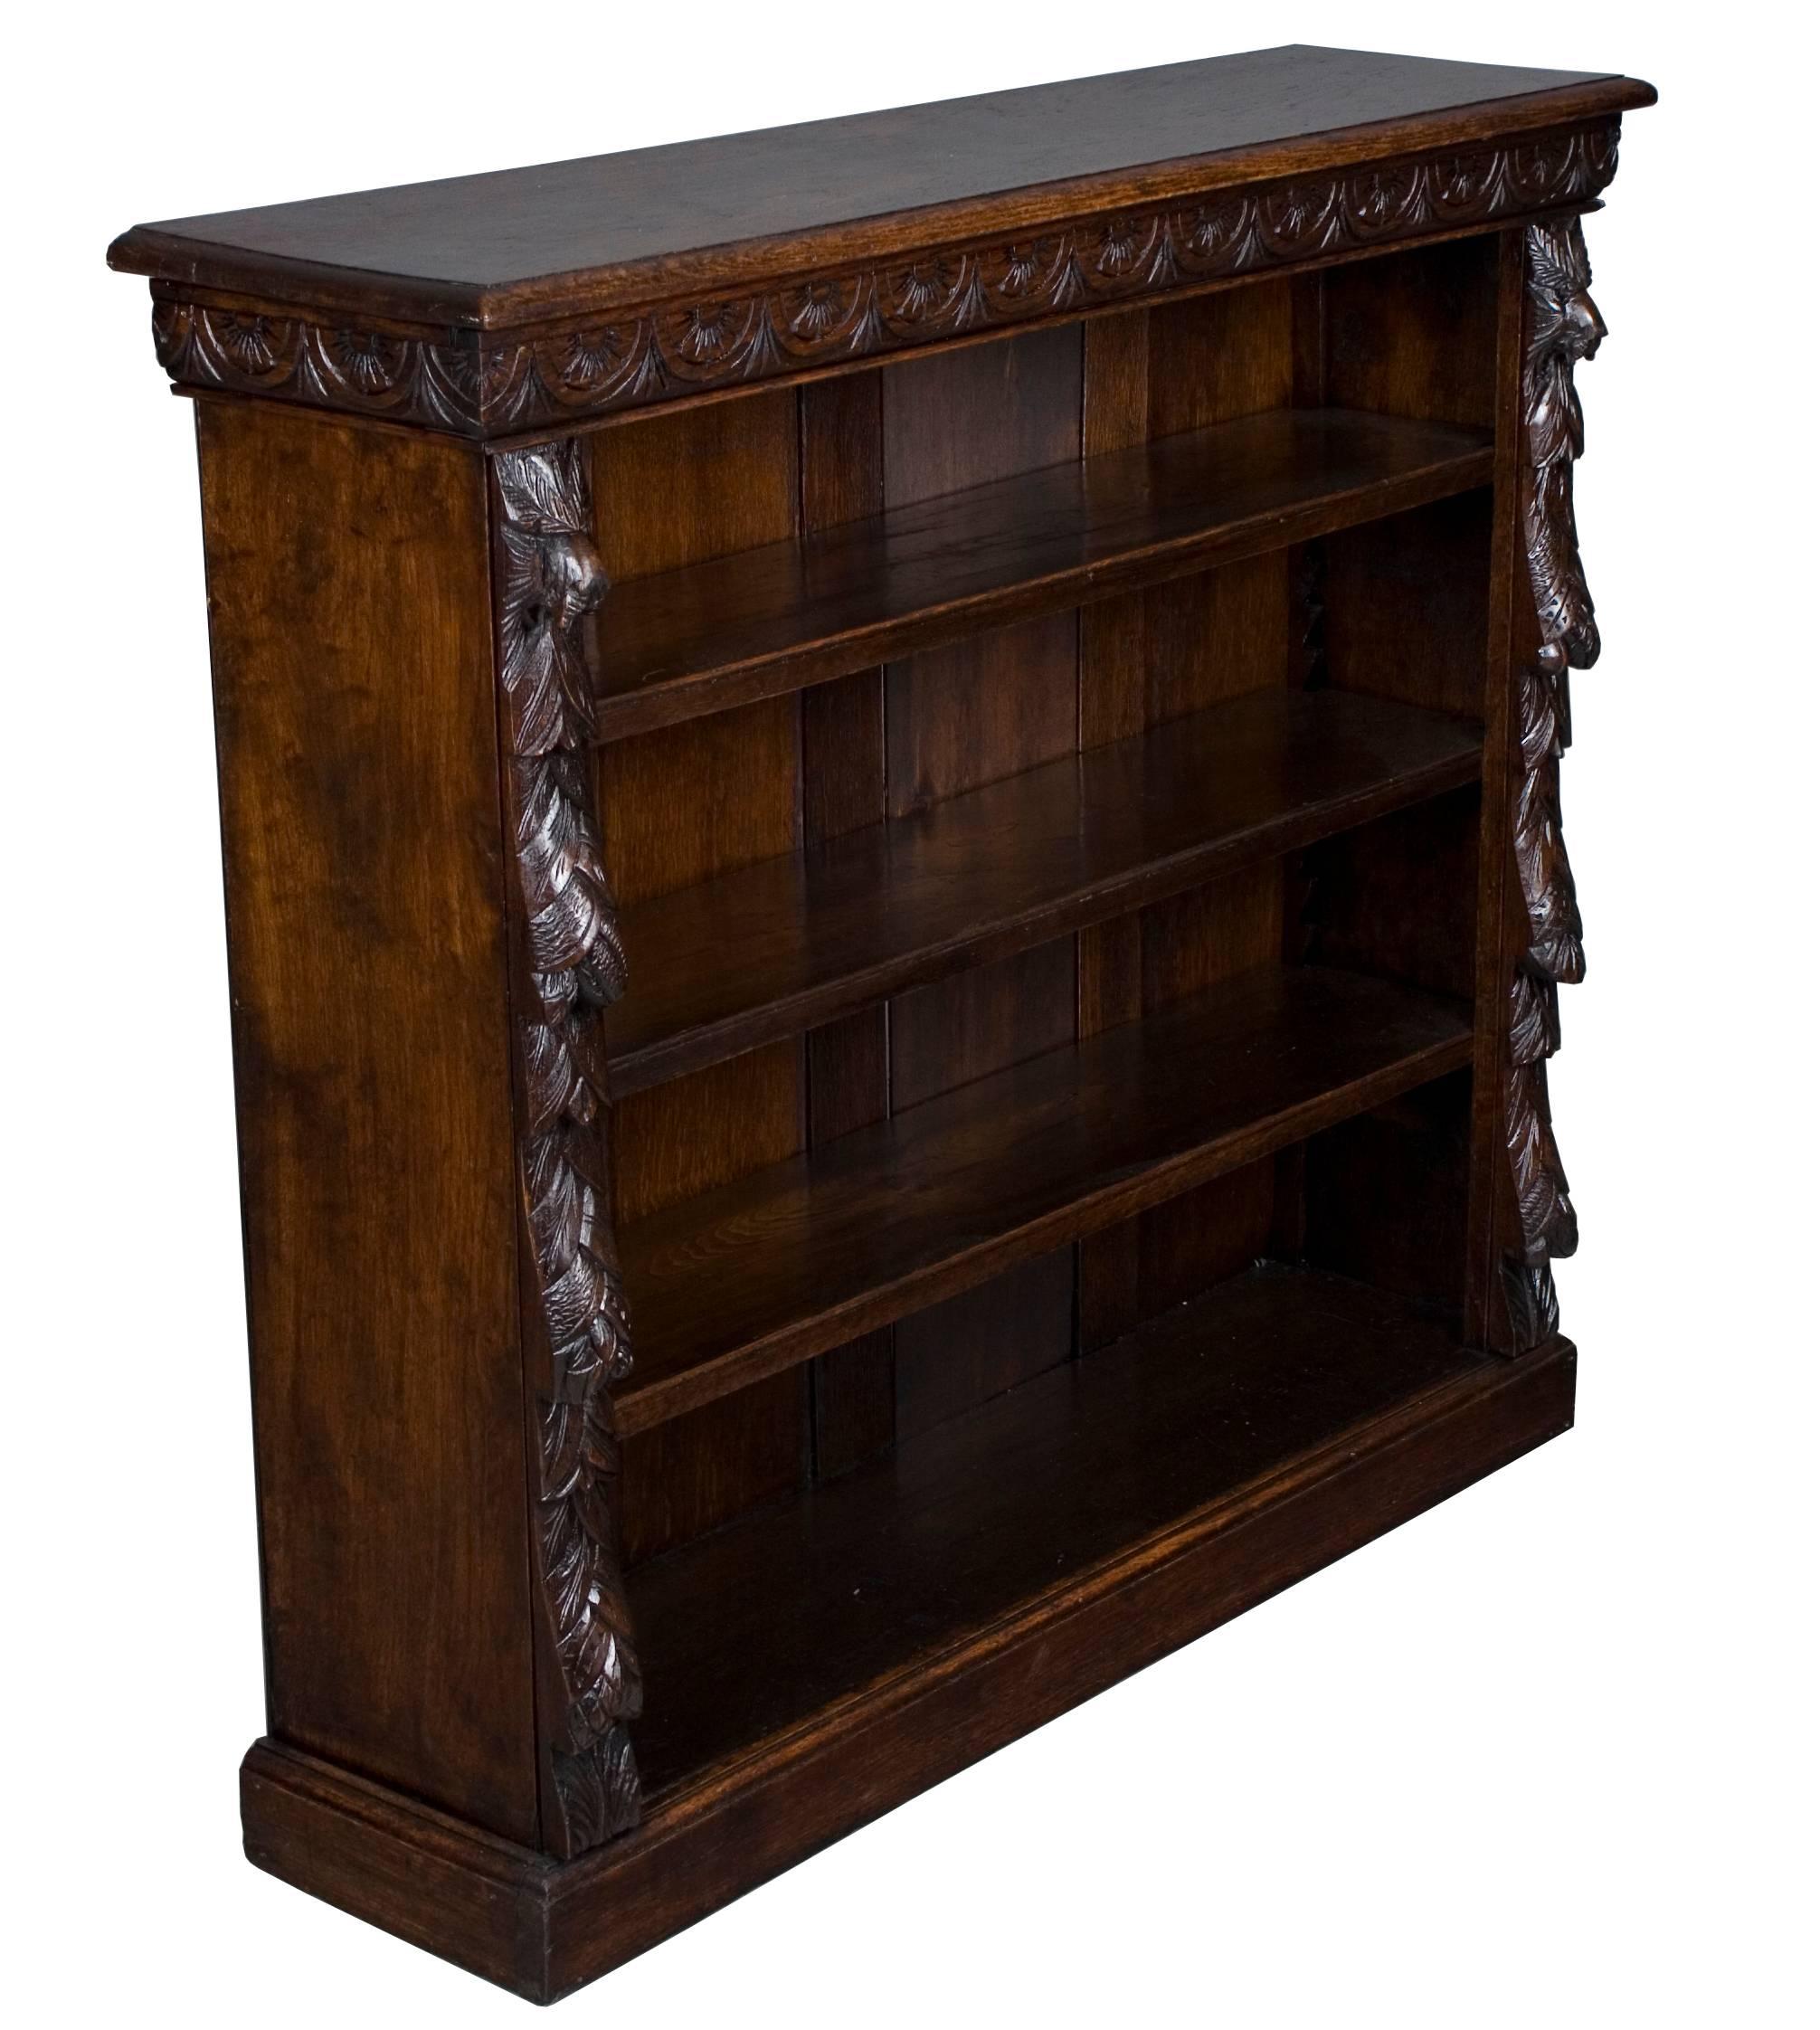 This beautiful short bookcase was made in England around the year 1890. Done in a stunning carved oak, it has a very dark color. Typical for the period, the sides have a green mask carving at the top with flora flowing down below and half circles